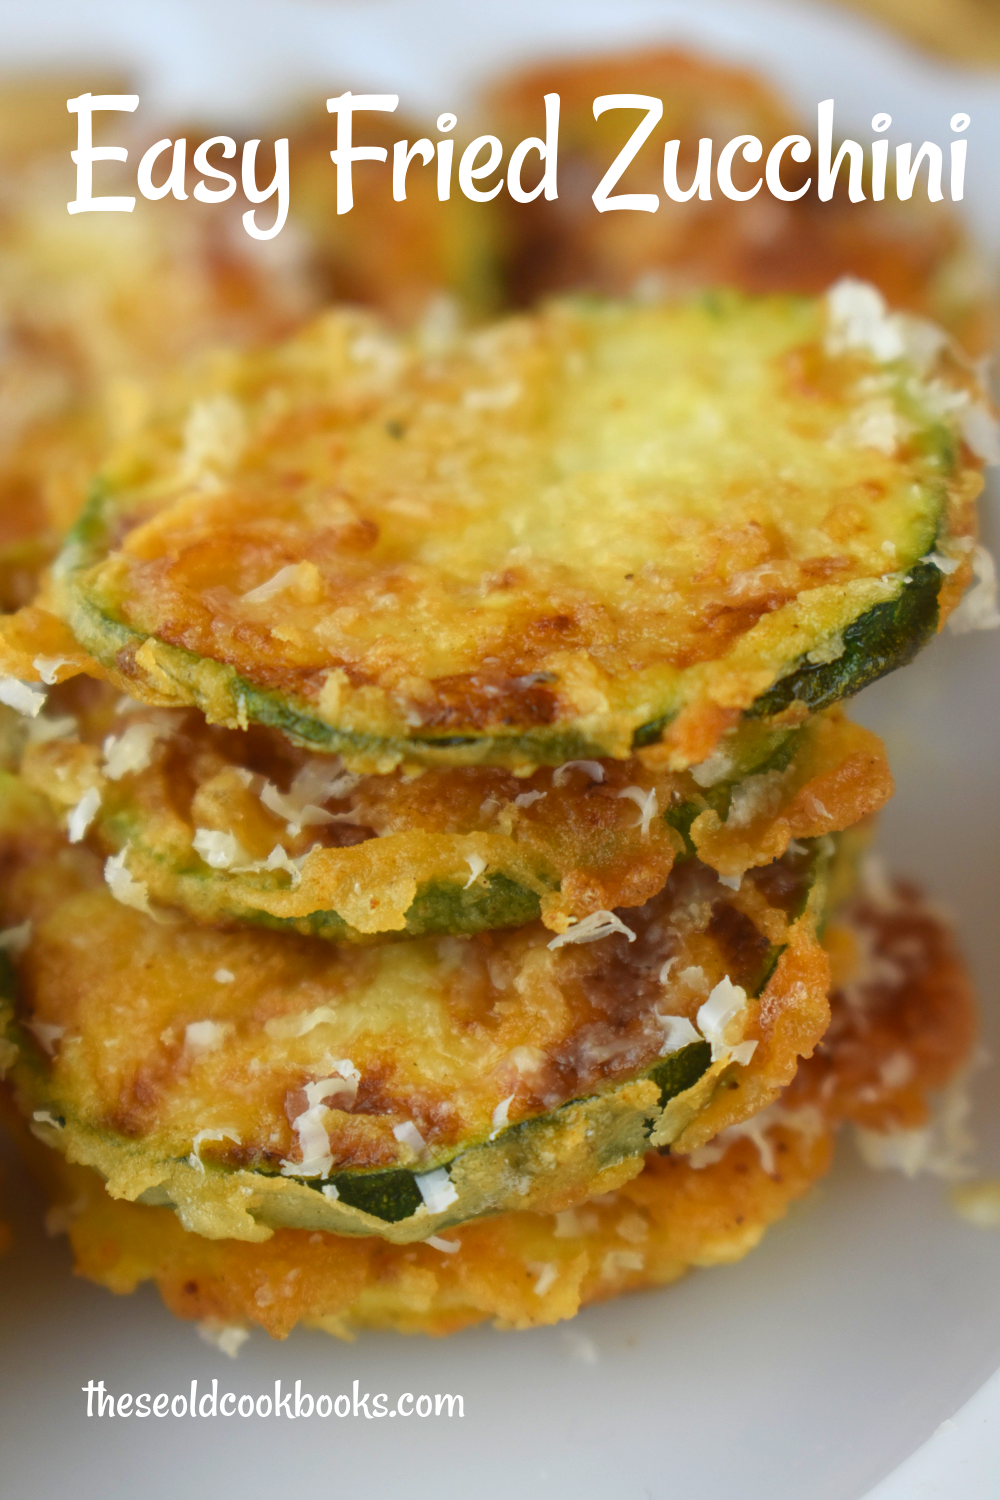 Easy Pan Fried Zucchini – The Step By Step Way To Fry Zucchini Slices